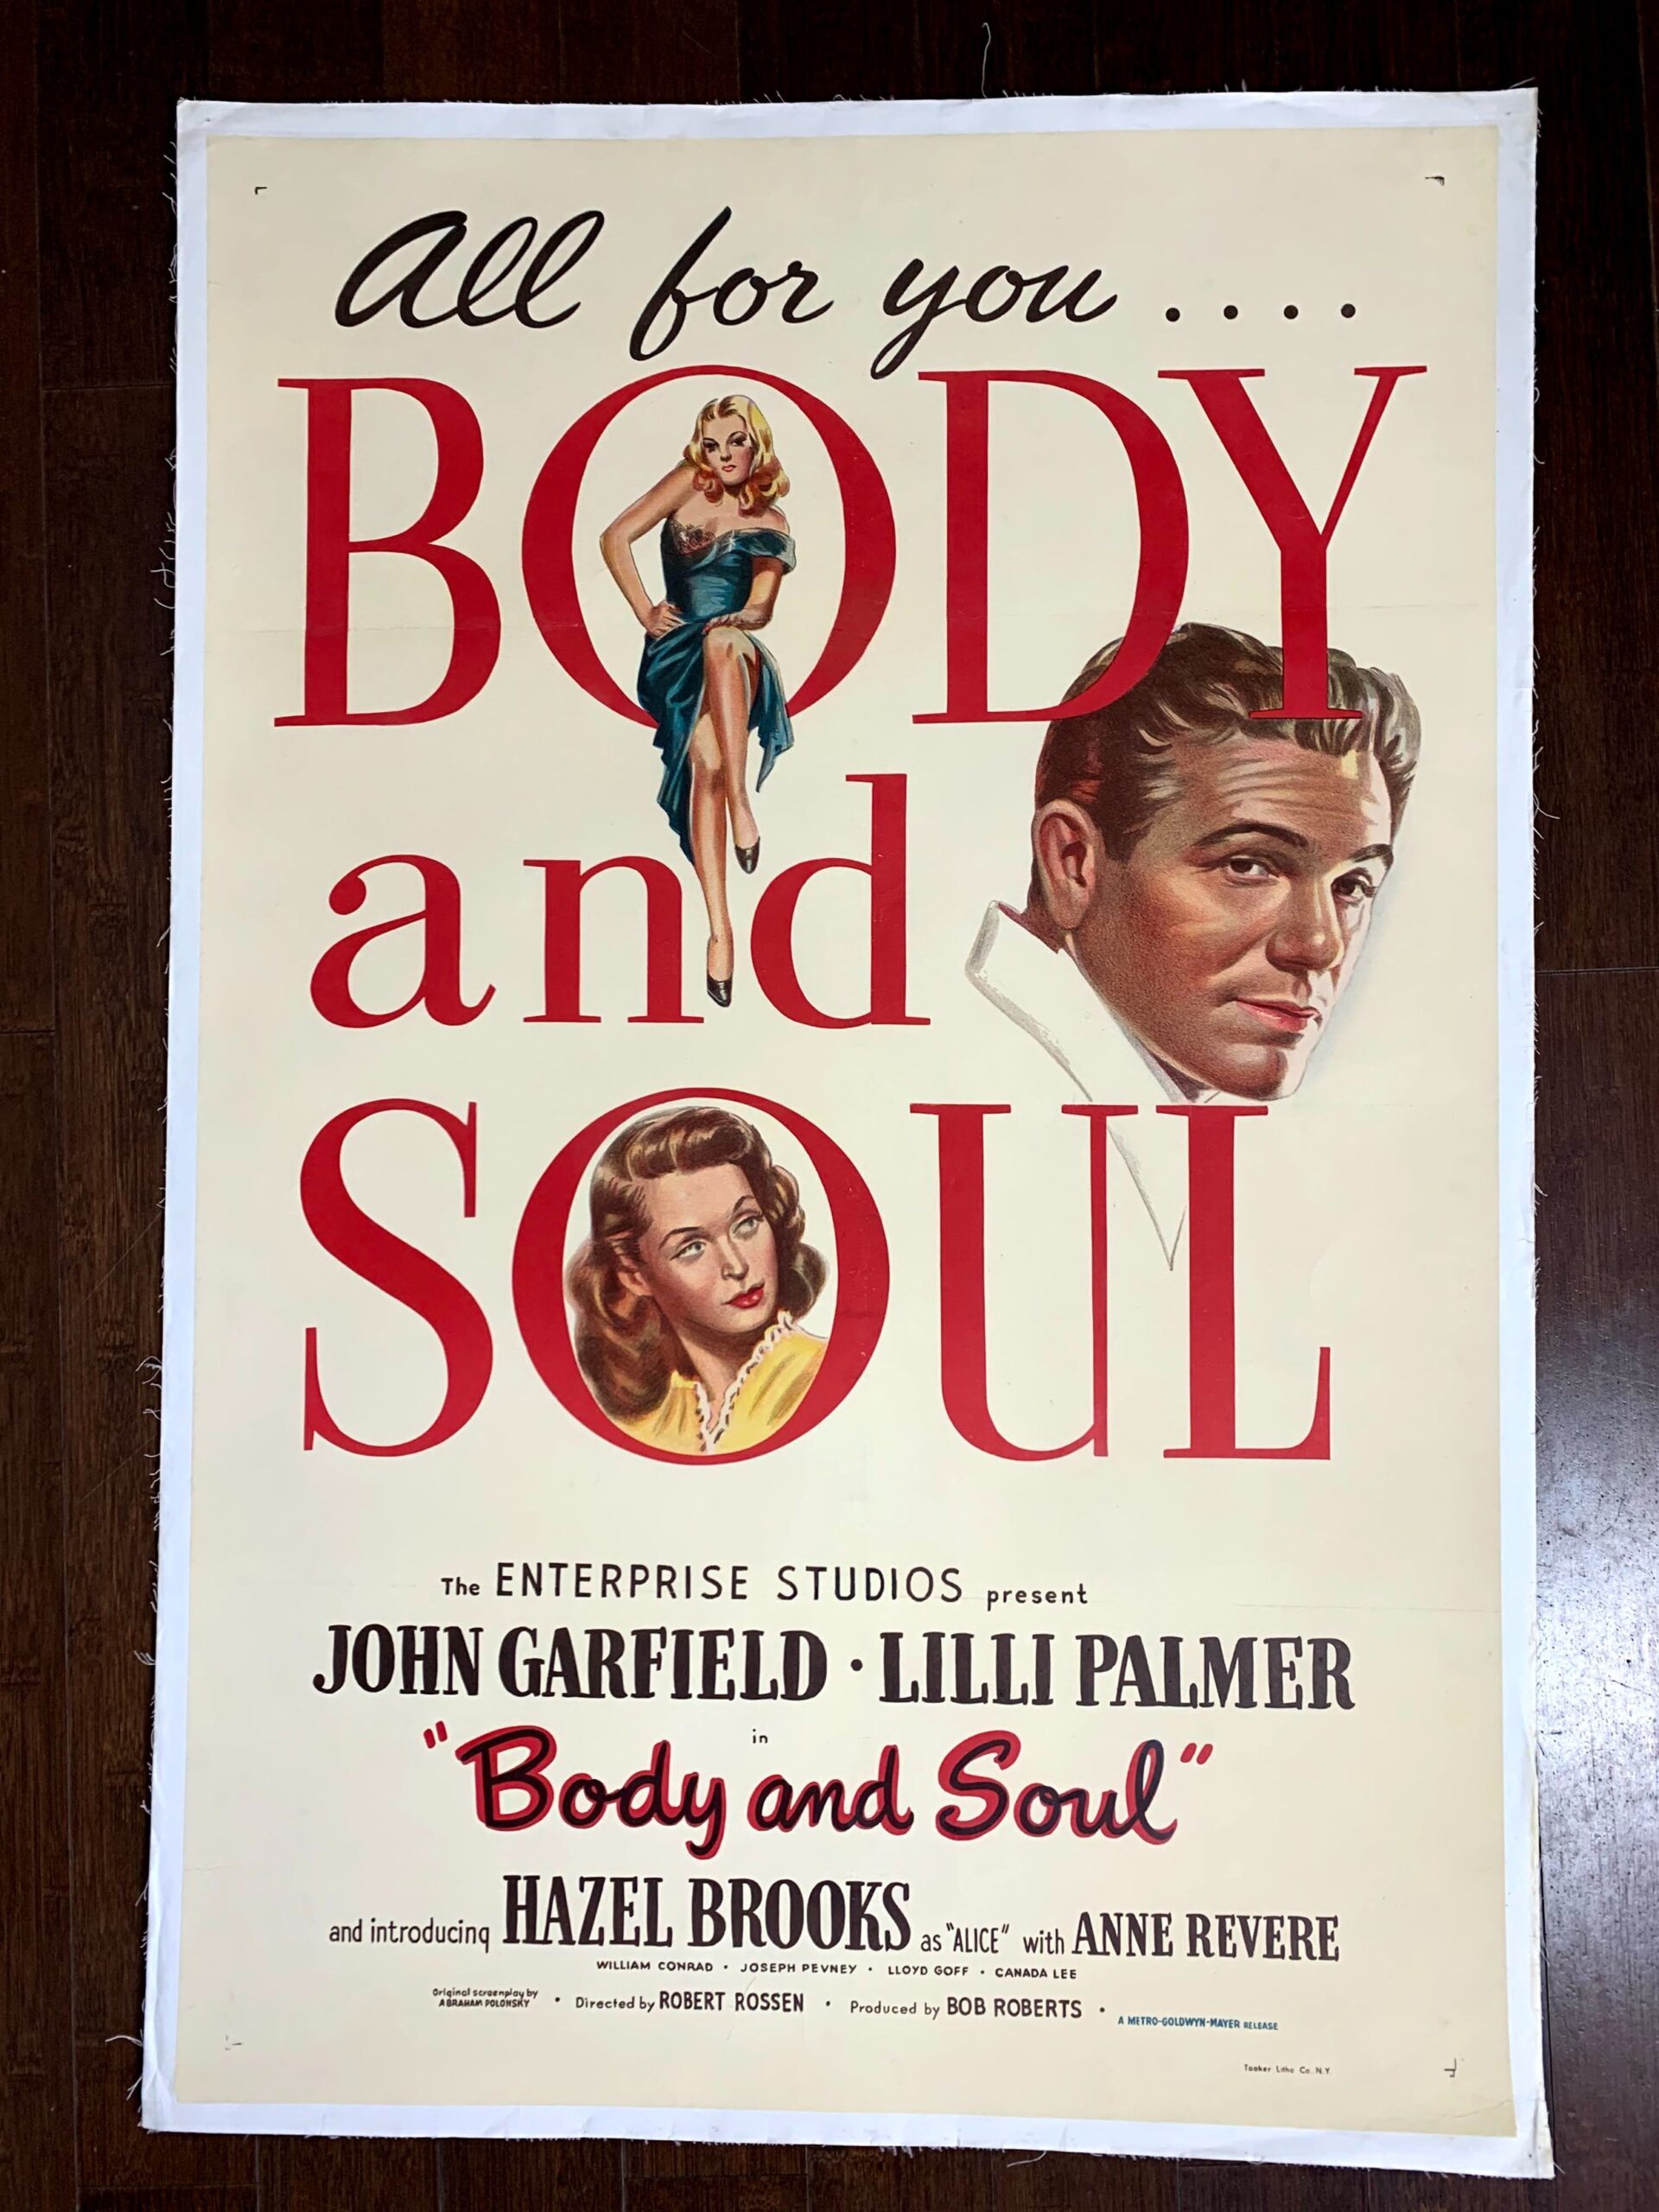 body and soul movie